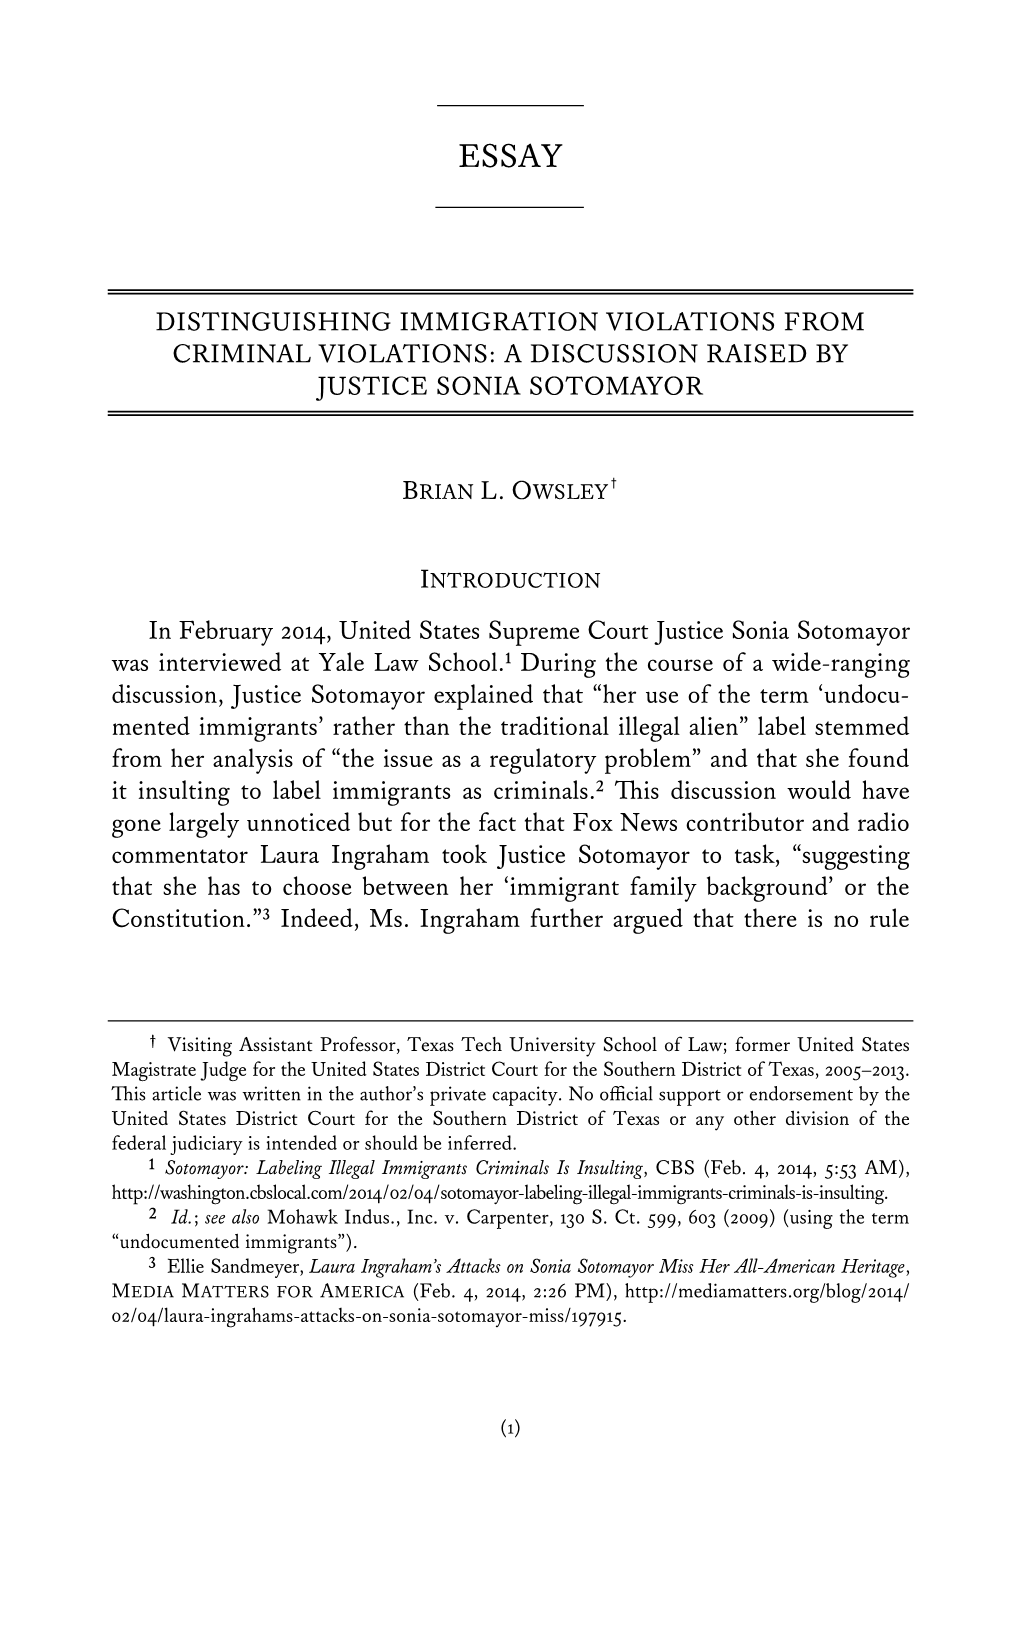 Distinguishing Immigration Violations from Criminal Violations: a Discussion Raised by Justice Sonia Sotomayor